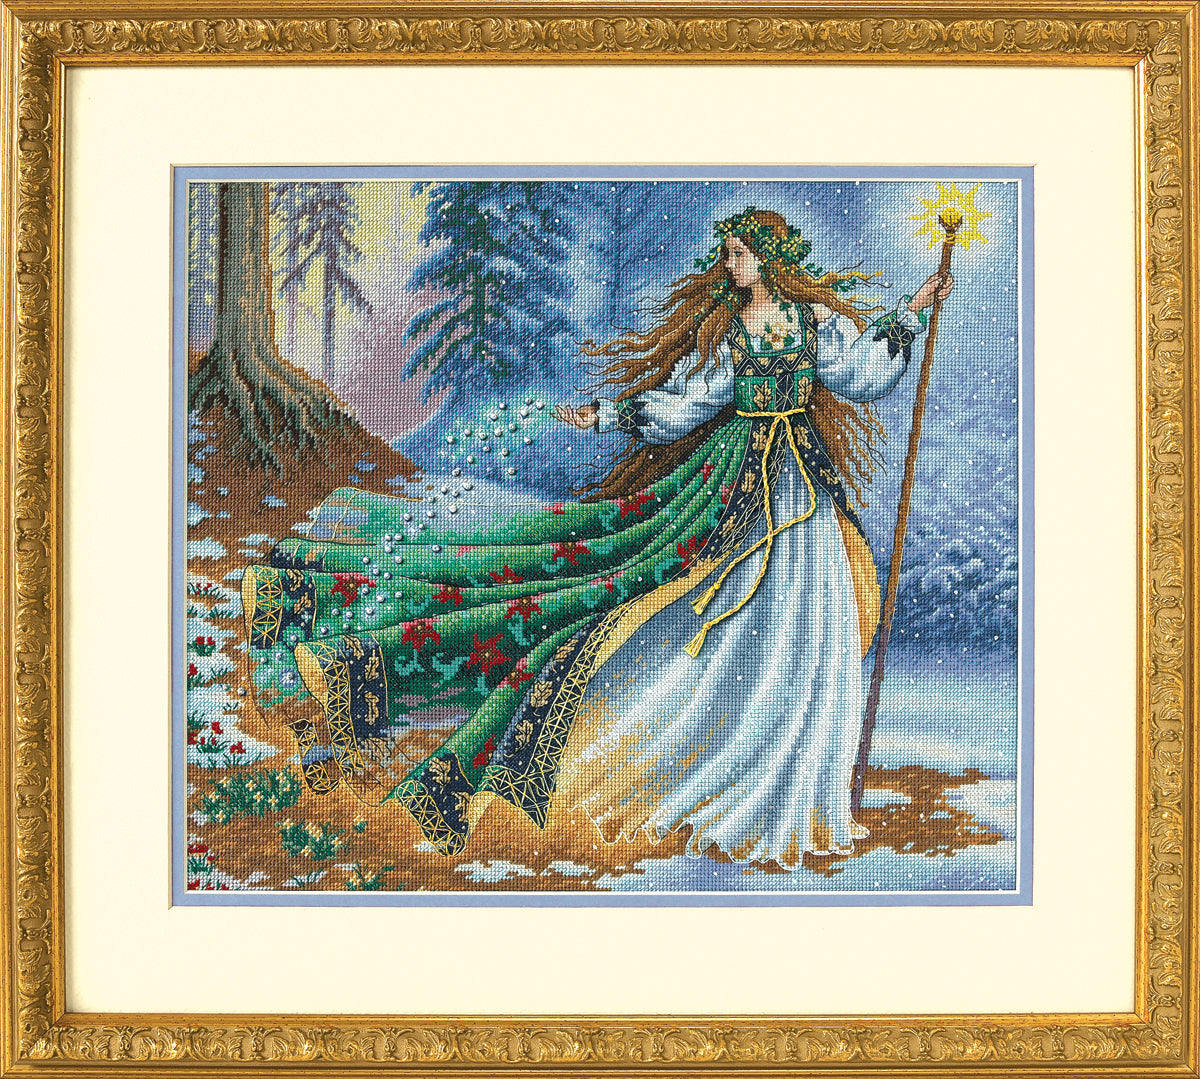 Dimensions Counted Gold Cross Stitch Kit Woodland Enchantress